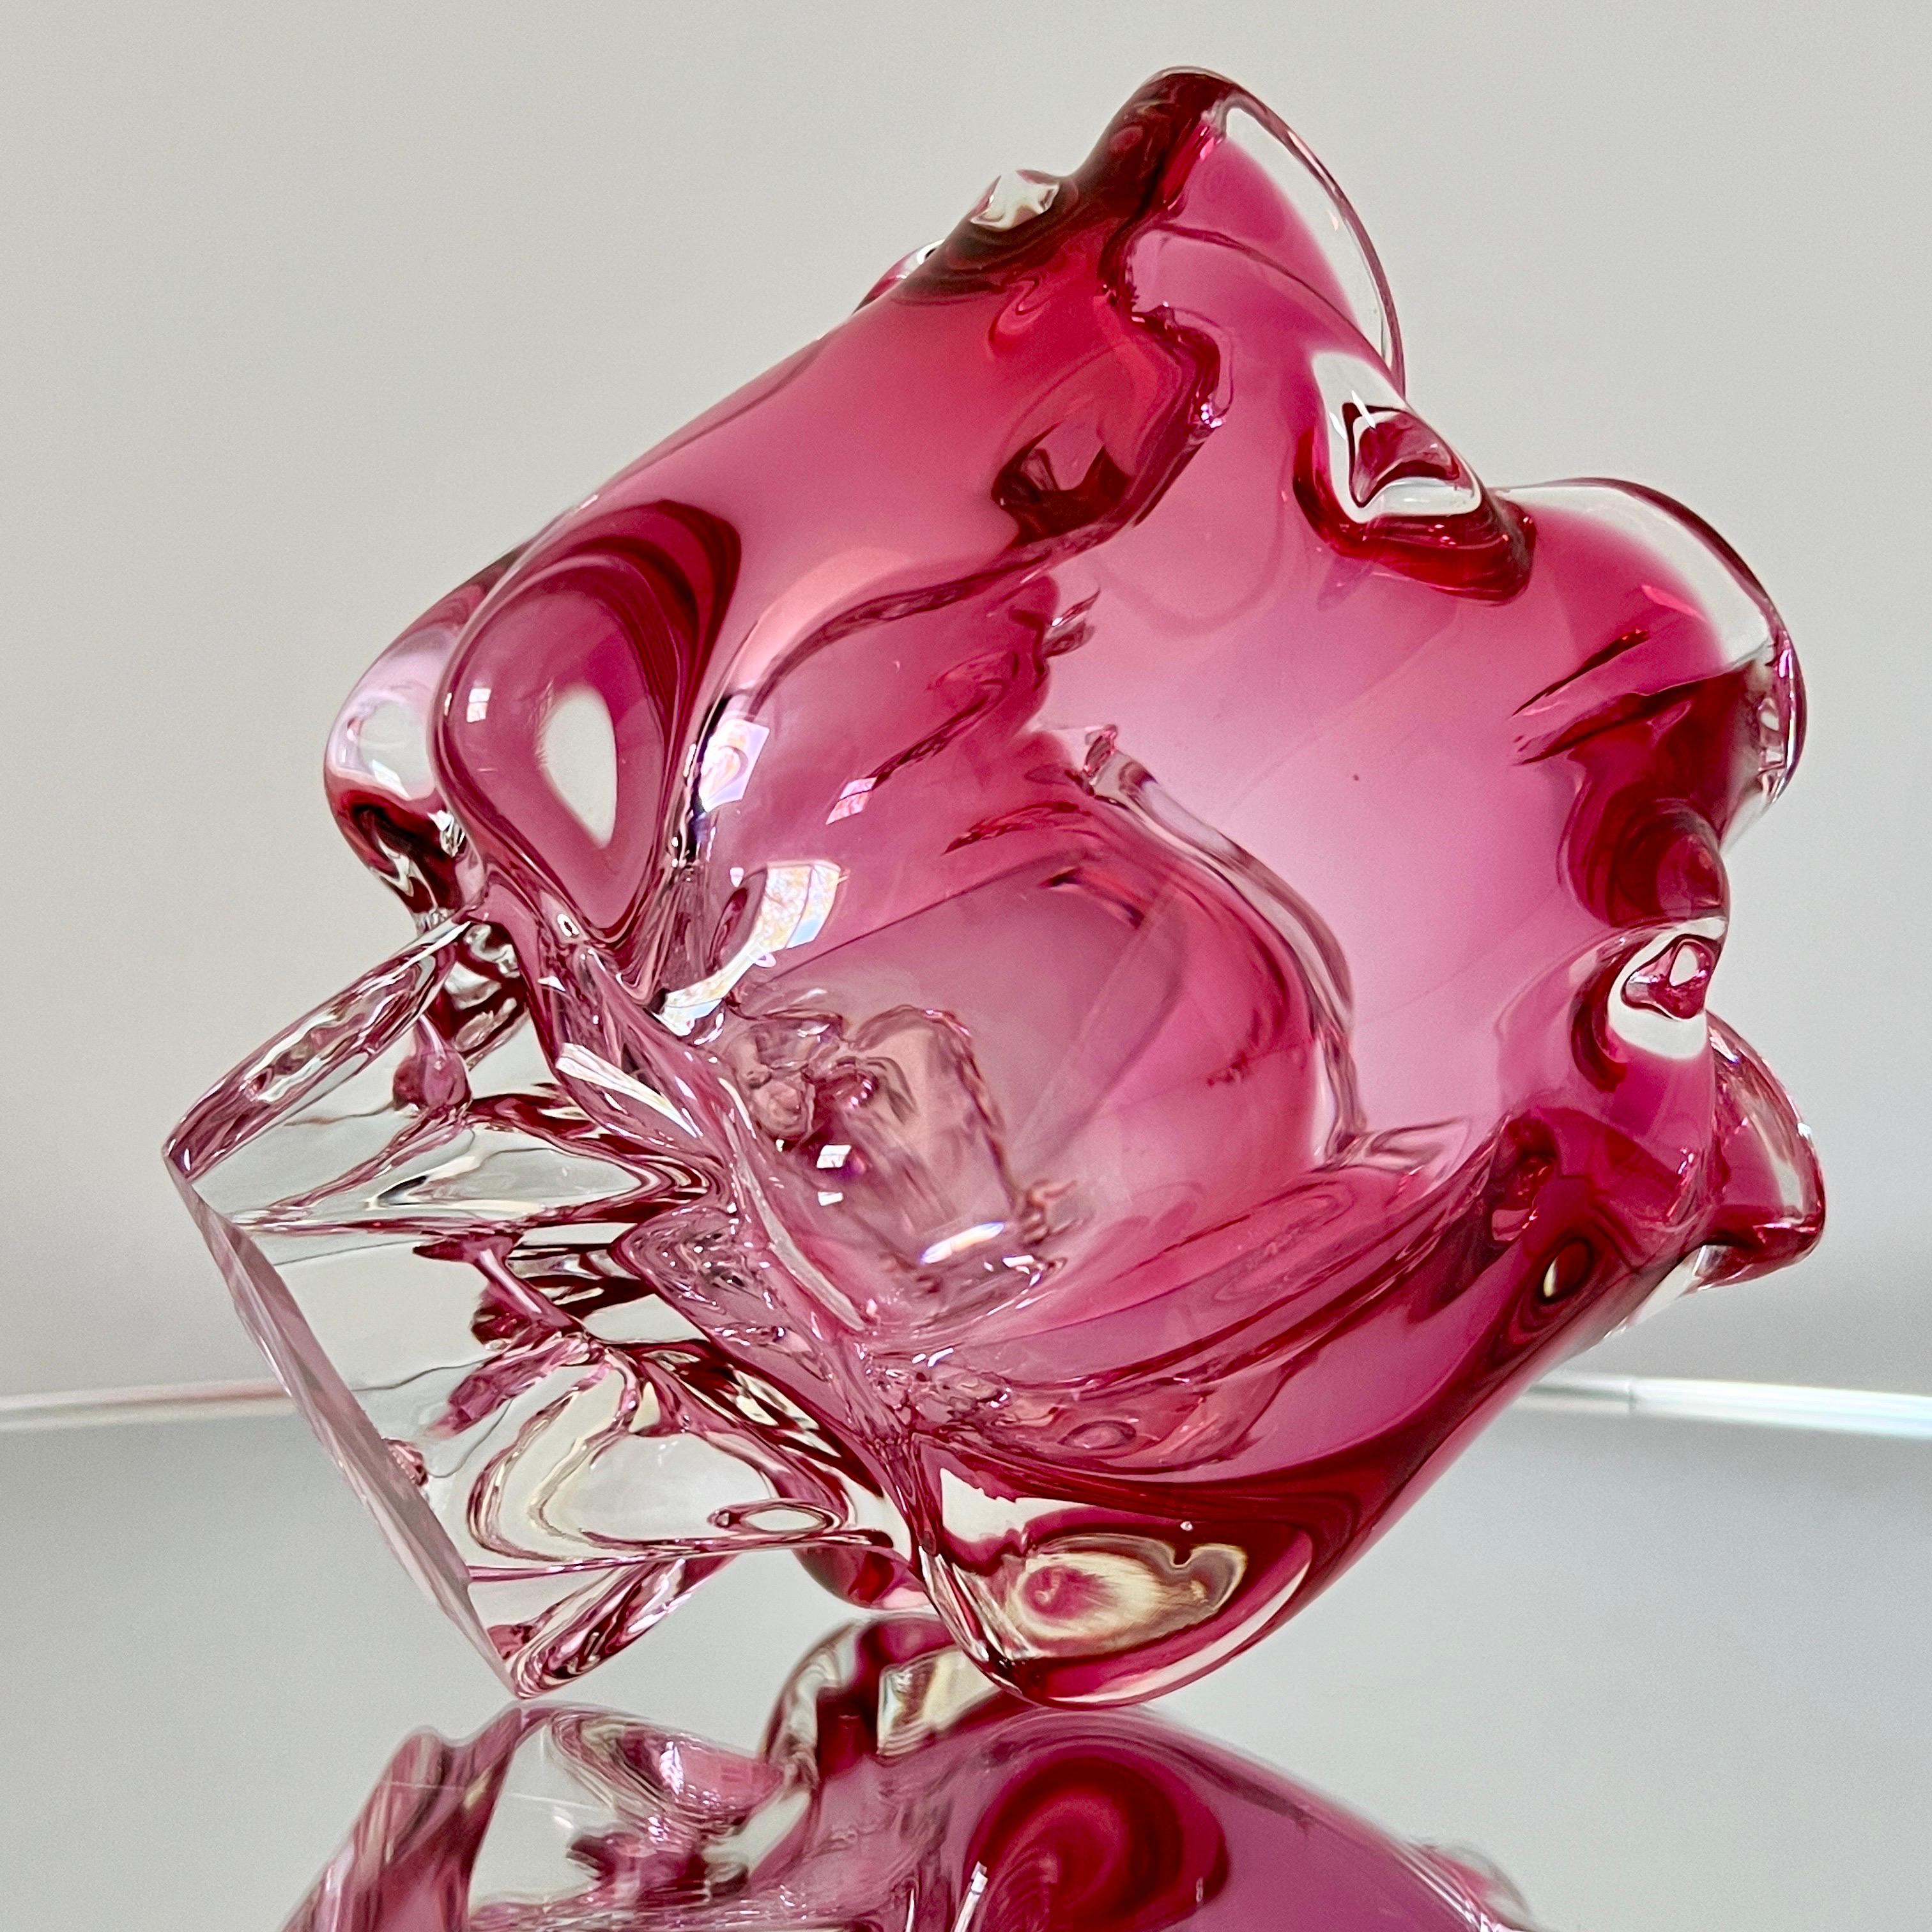 Pink Murano Floral Vase with Footed Base by Fratelli Toso, c. 1950's For Sale 2